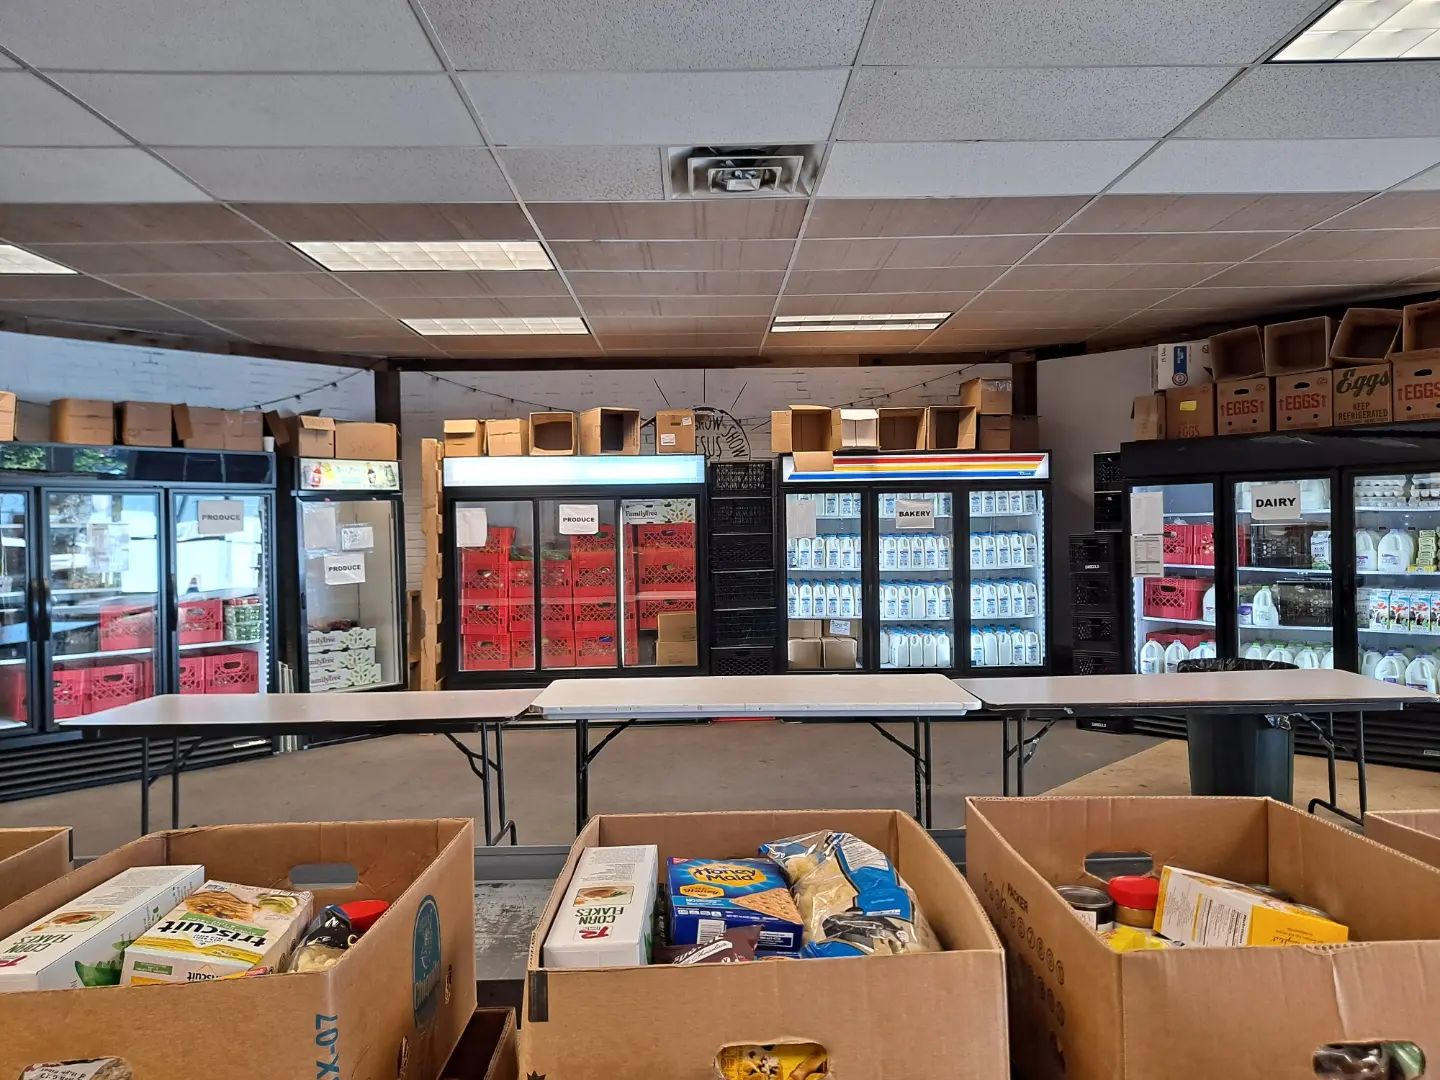 Southside Food Pantry